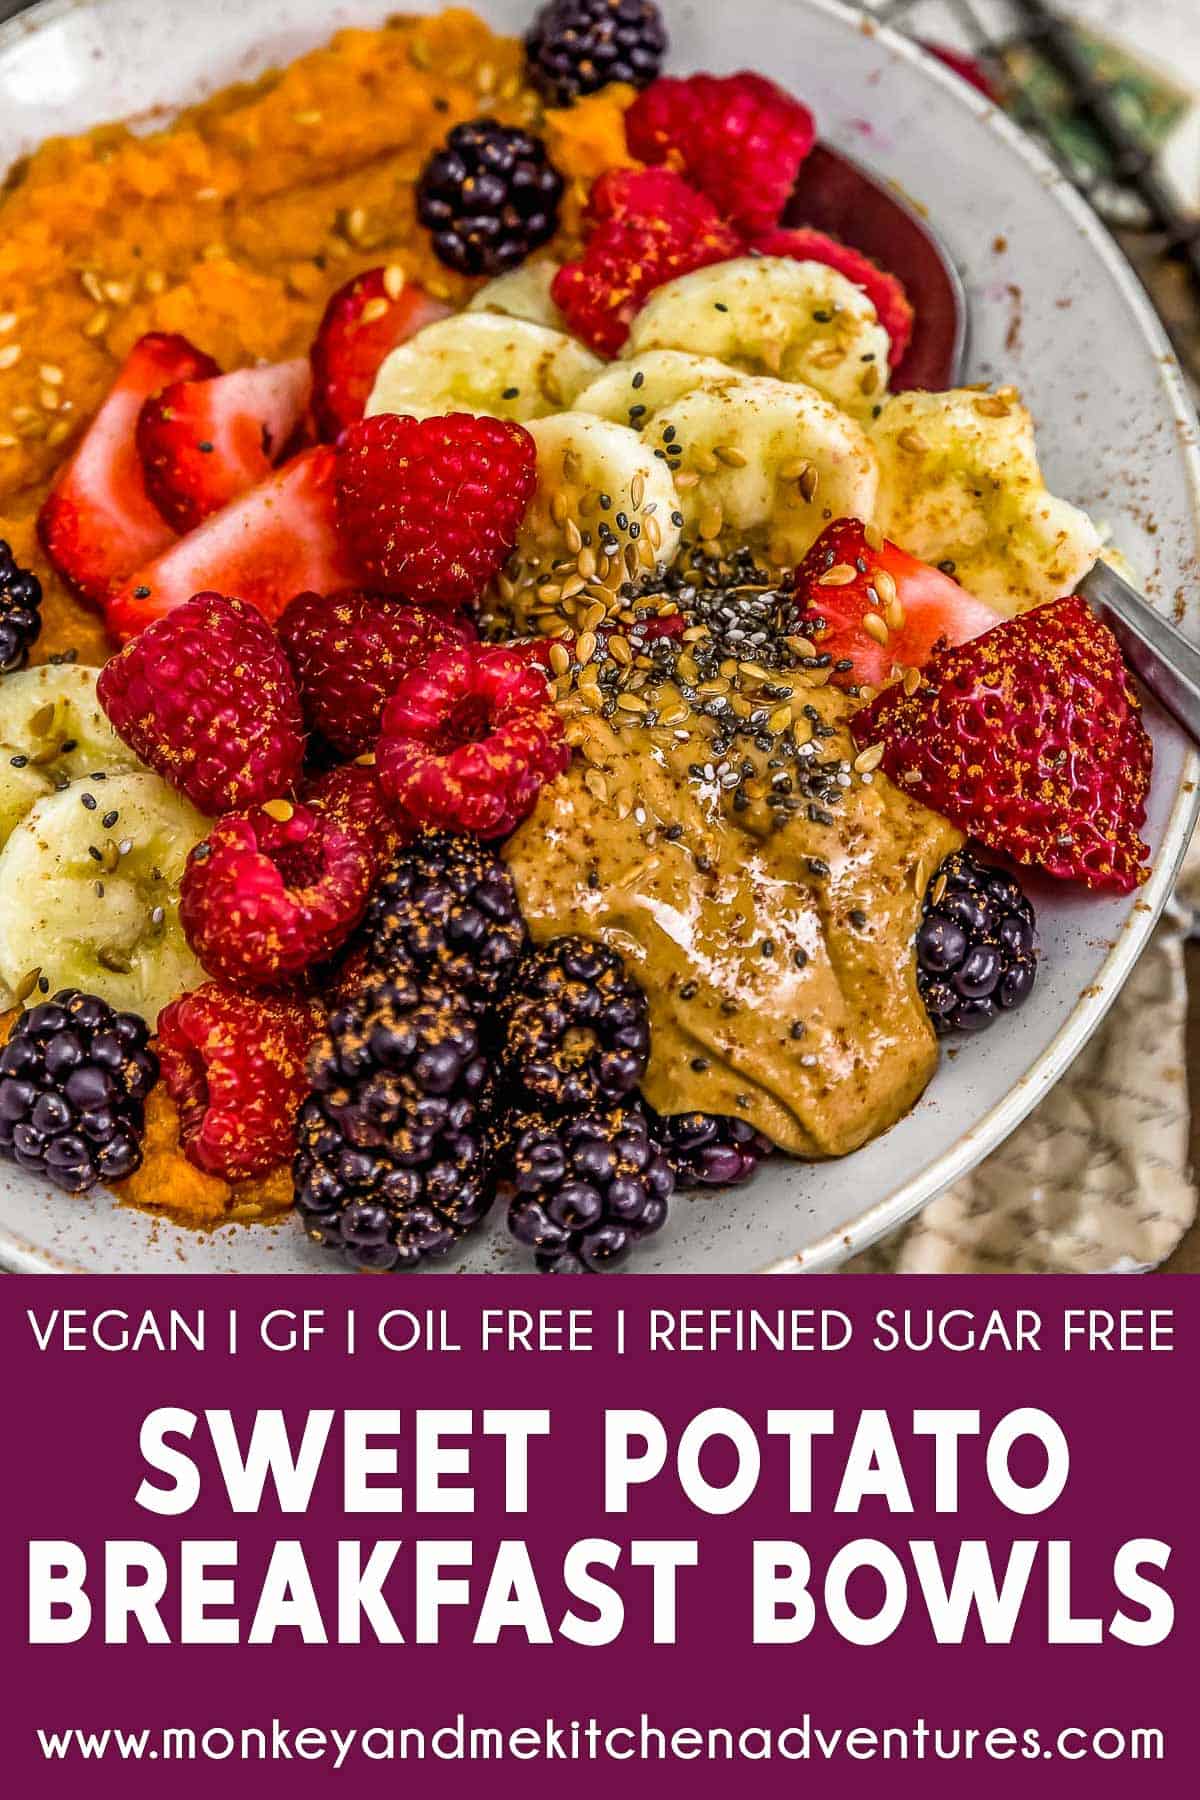 Peanut Butter and Berries Bowl with text description